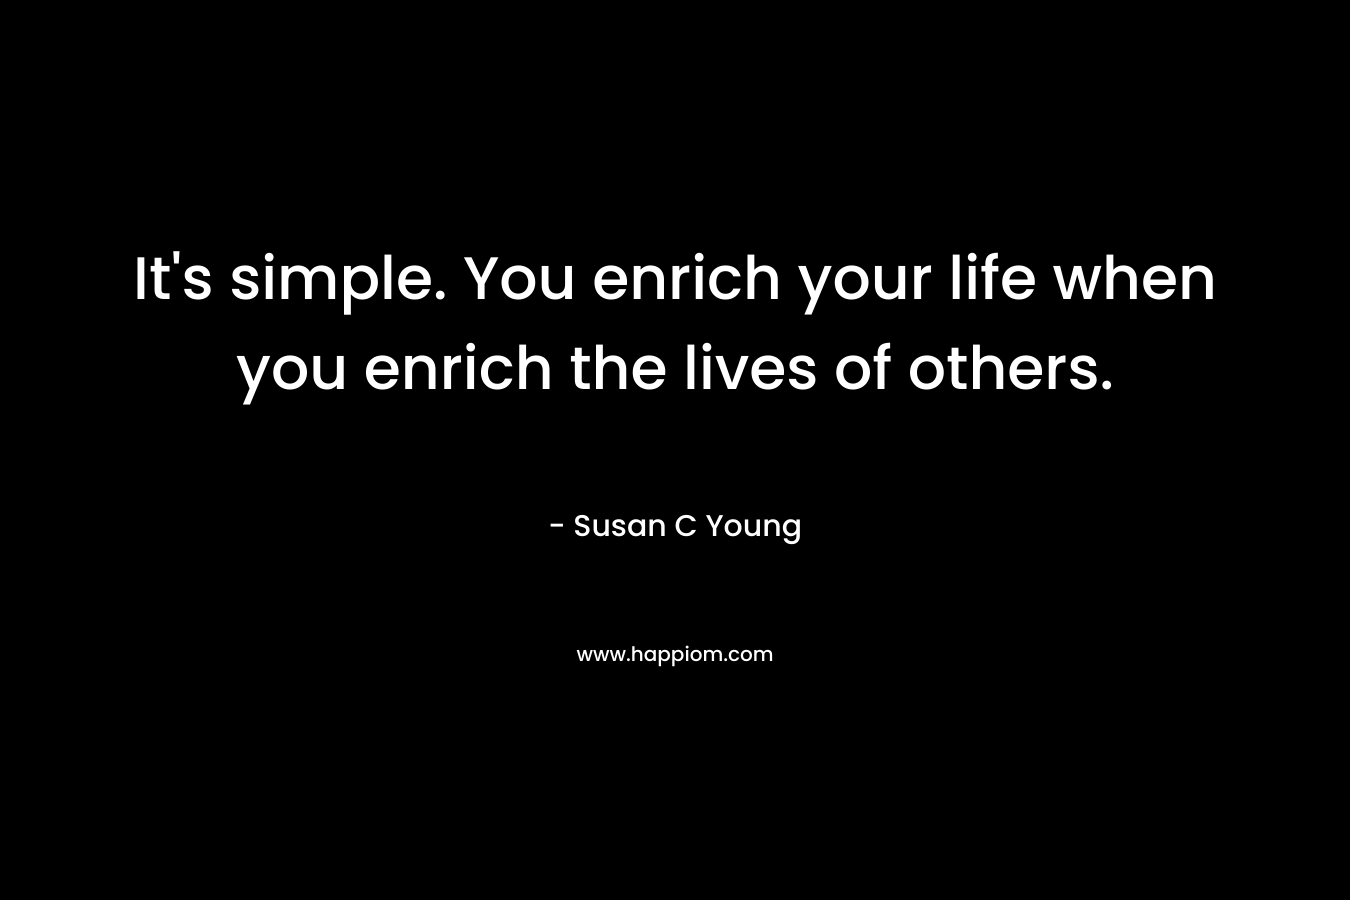 It’s simple. You enrich your life when you enrich the lives of others. – Susan C Young